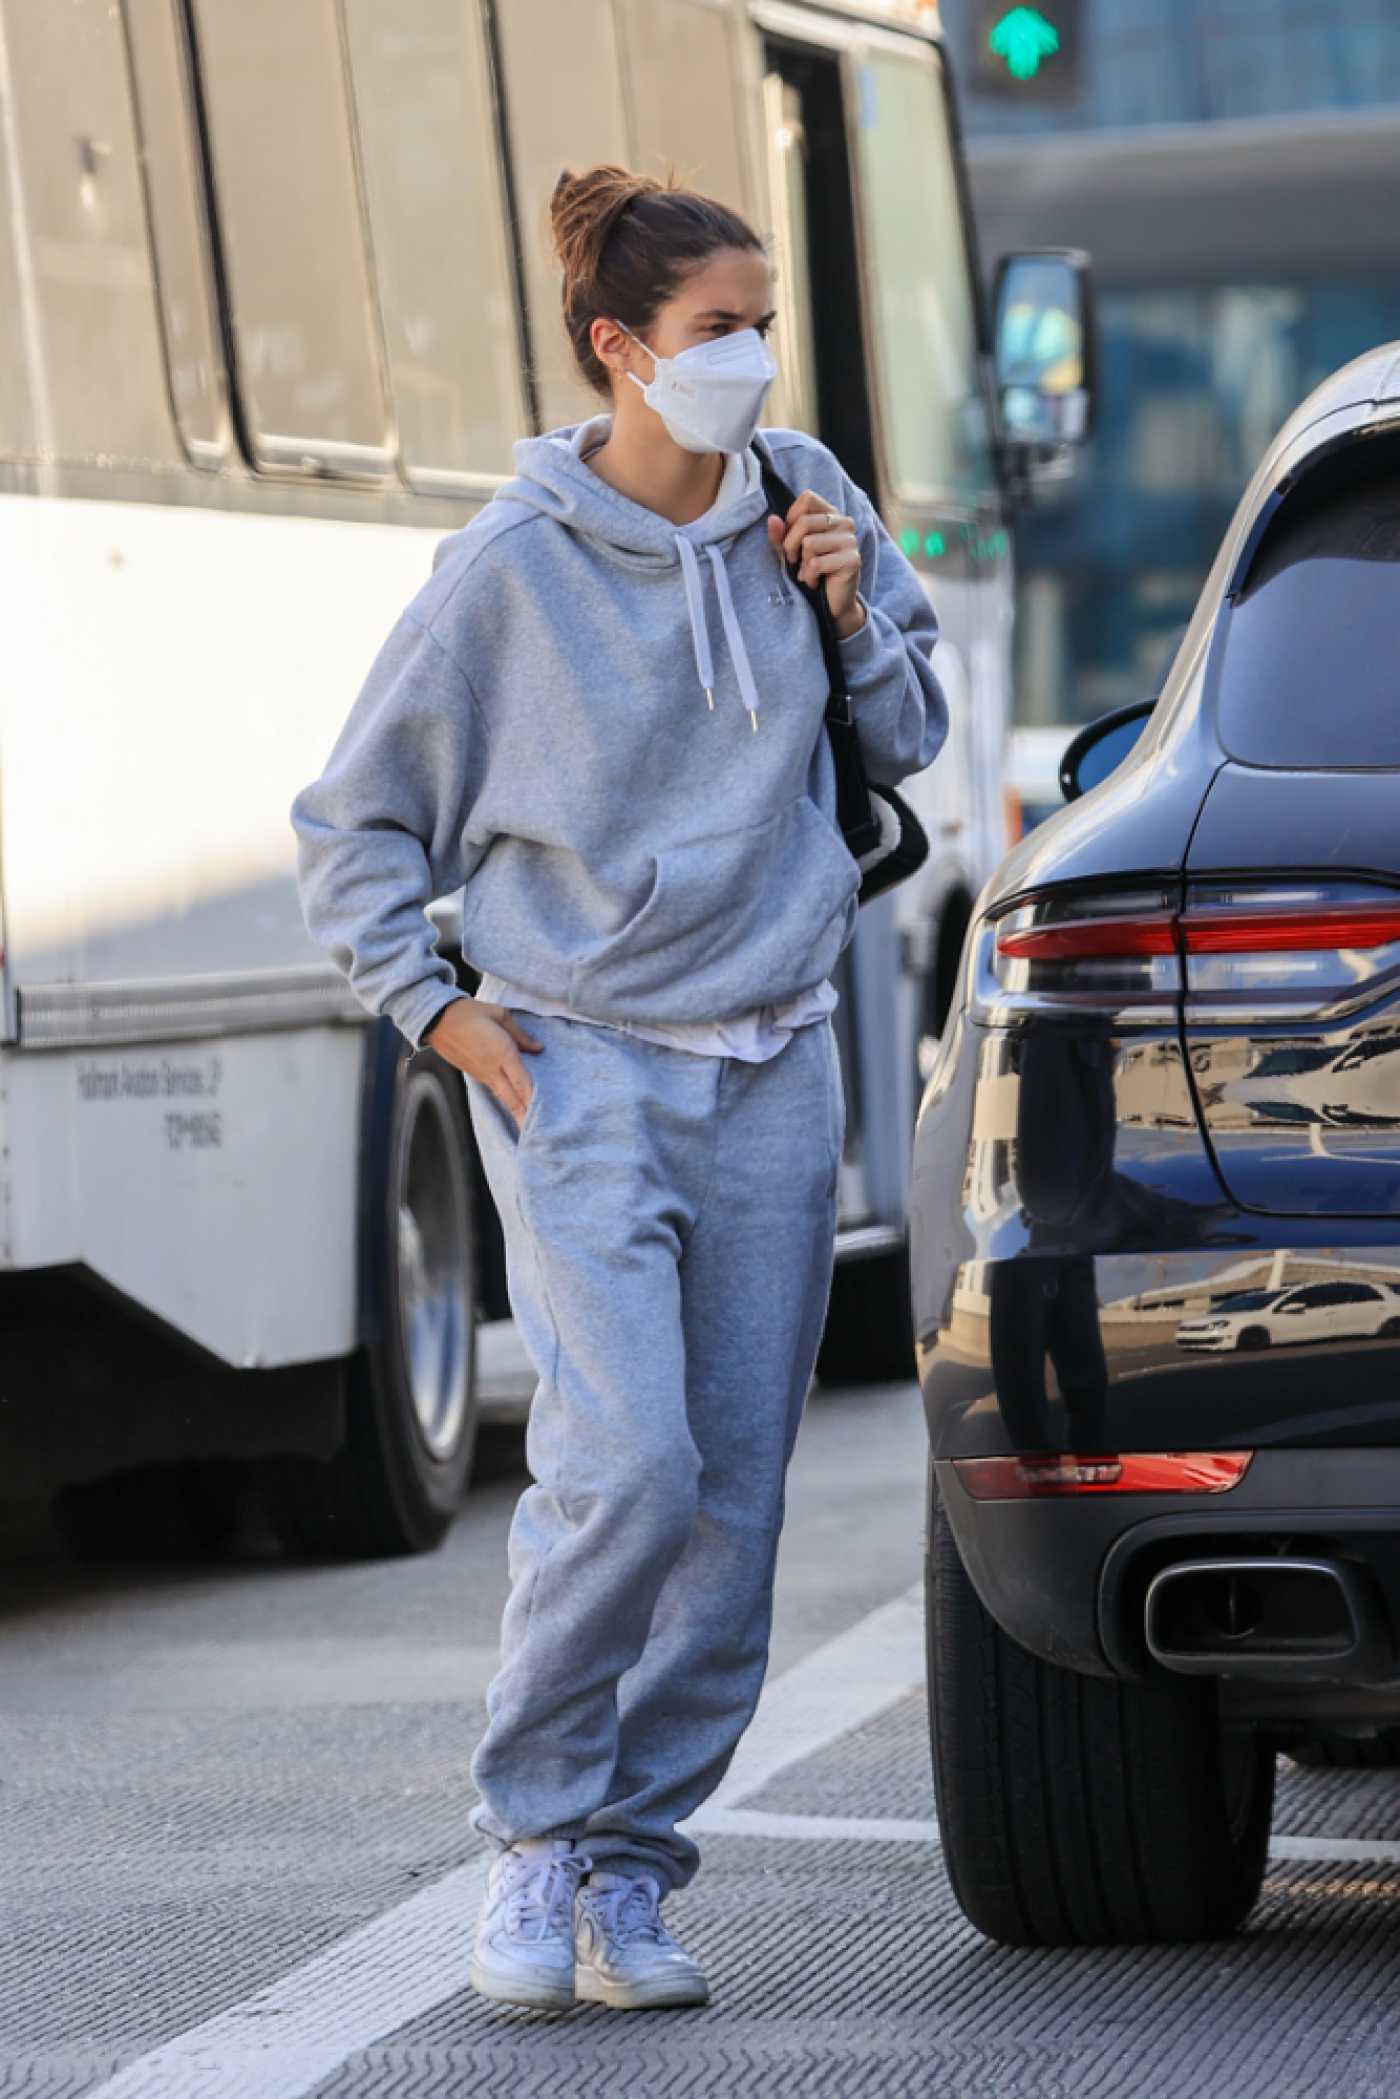 Sara Sampaio in a Grey Sweatsuit Arrives at LAX Airport in LA 12/11/2020